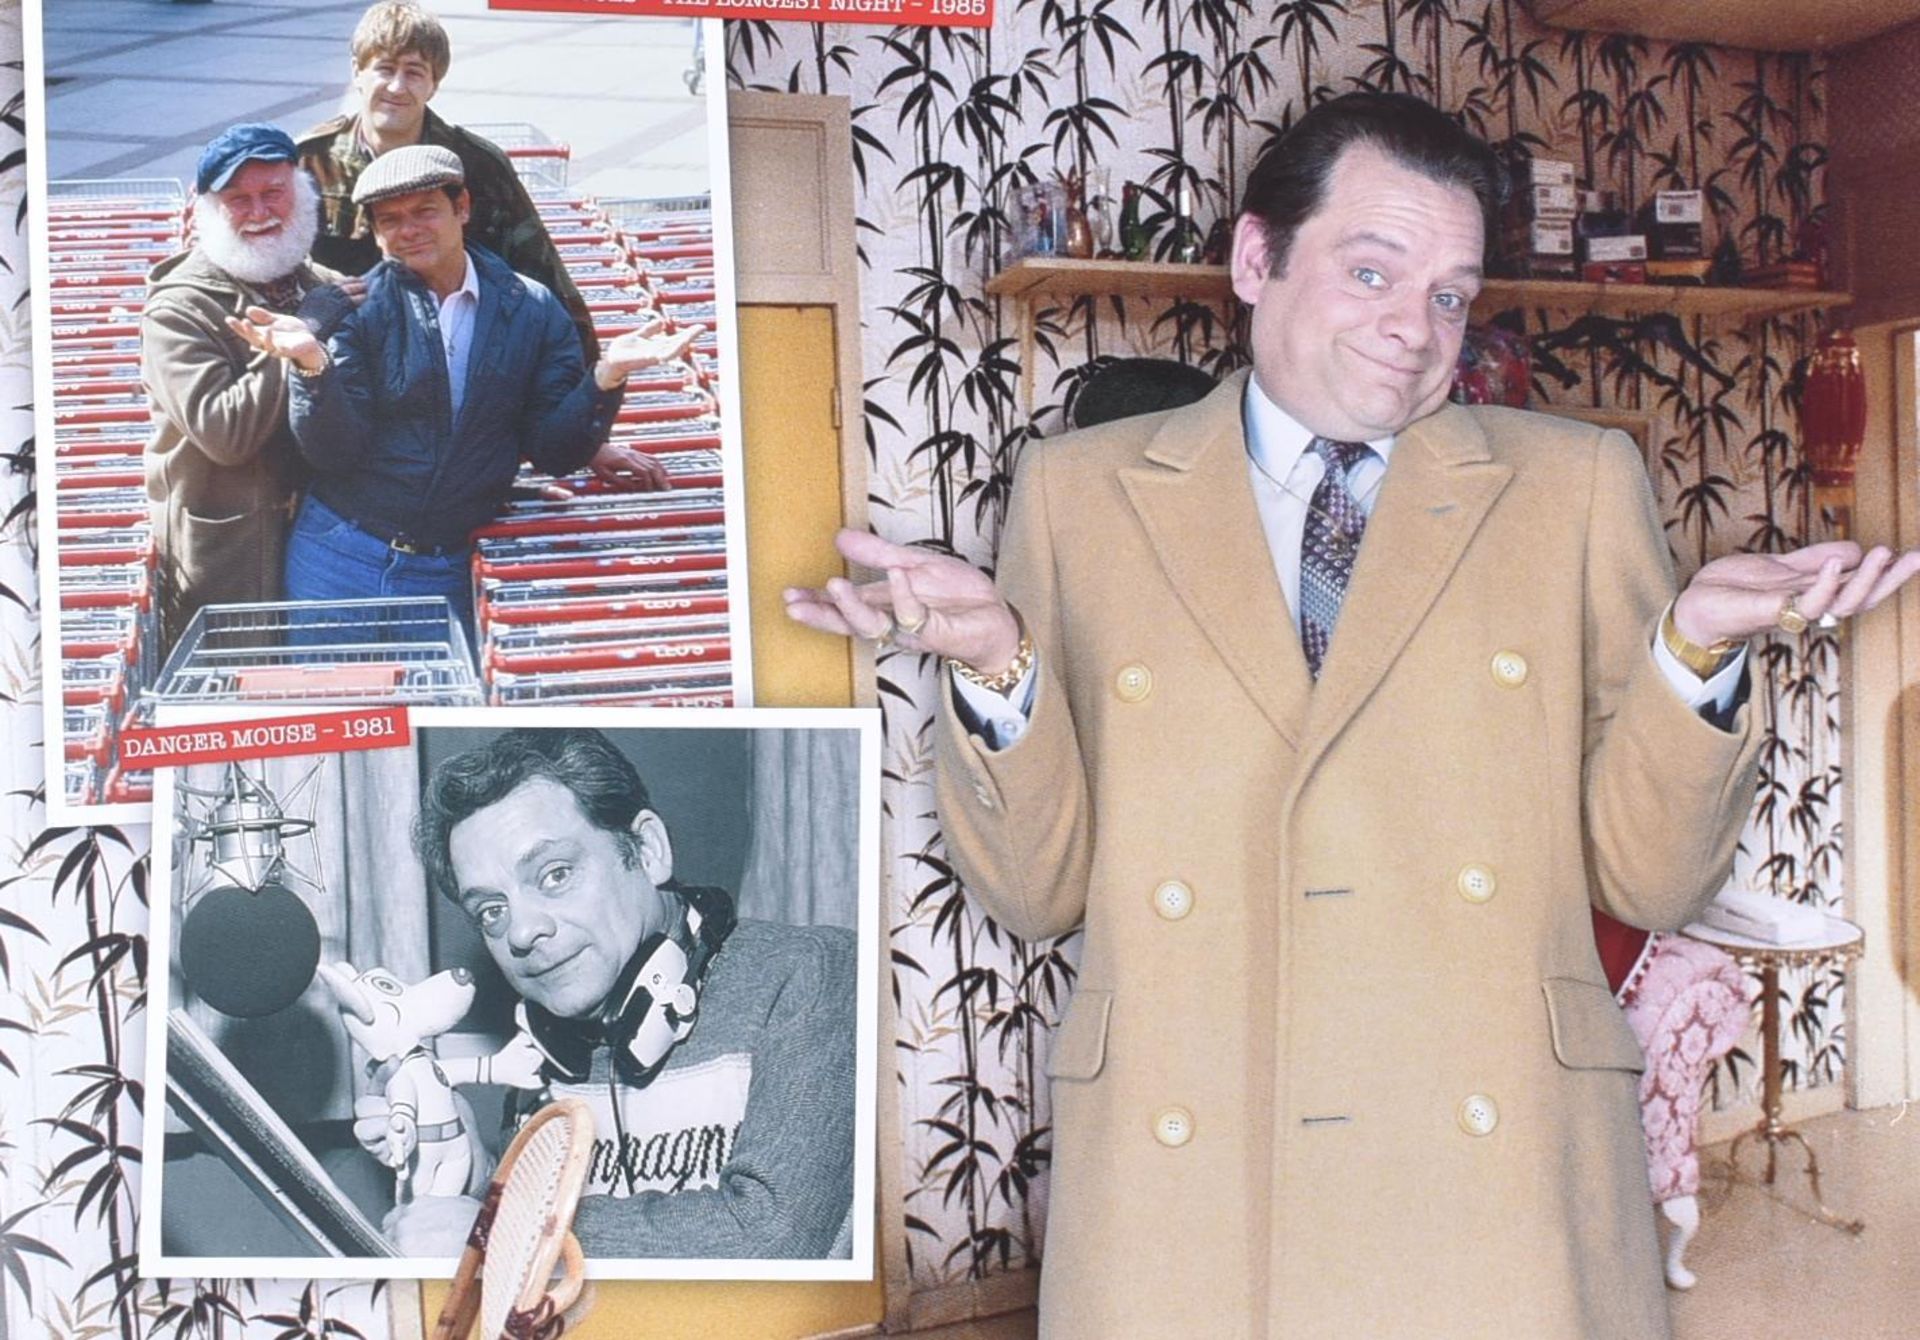 ONLY FOOLS & HORSES - SIR DAVID JASON EXHIBITION SIGNED PROGRAMME - Image 3 of 5